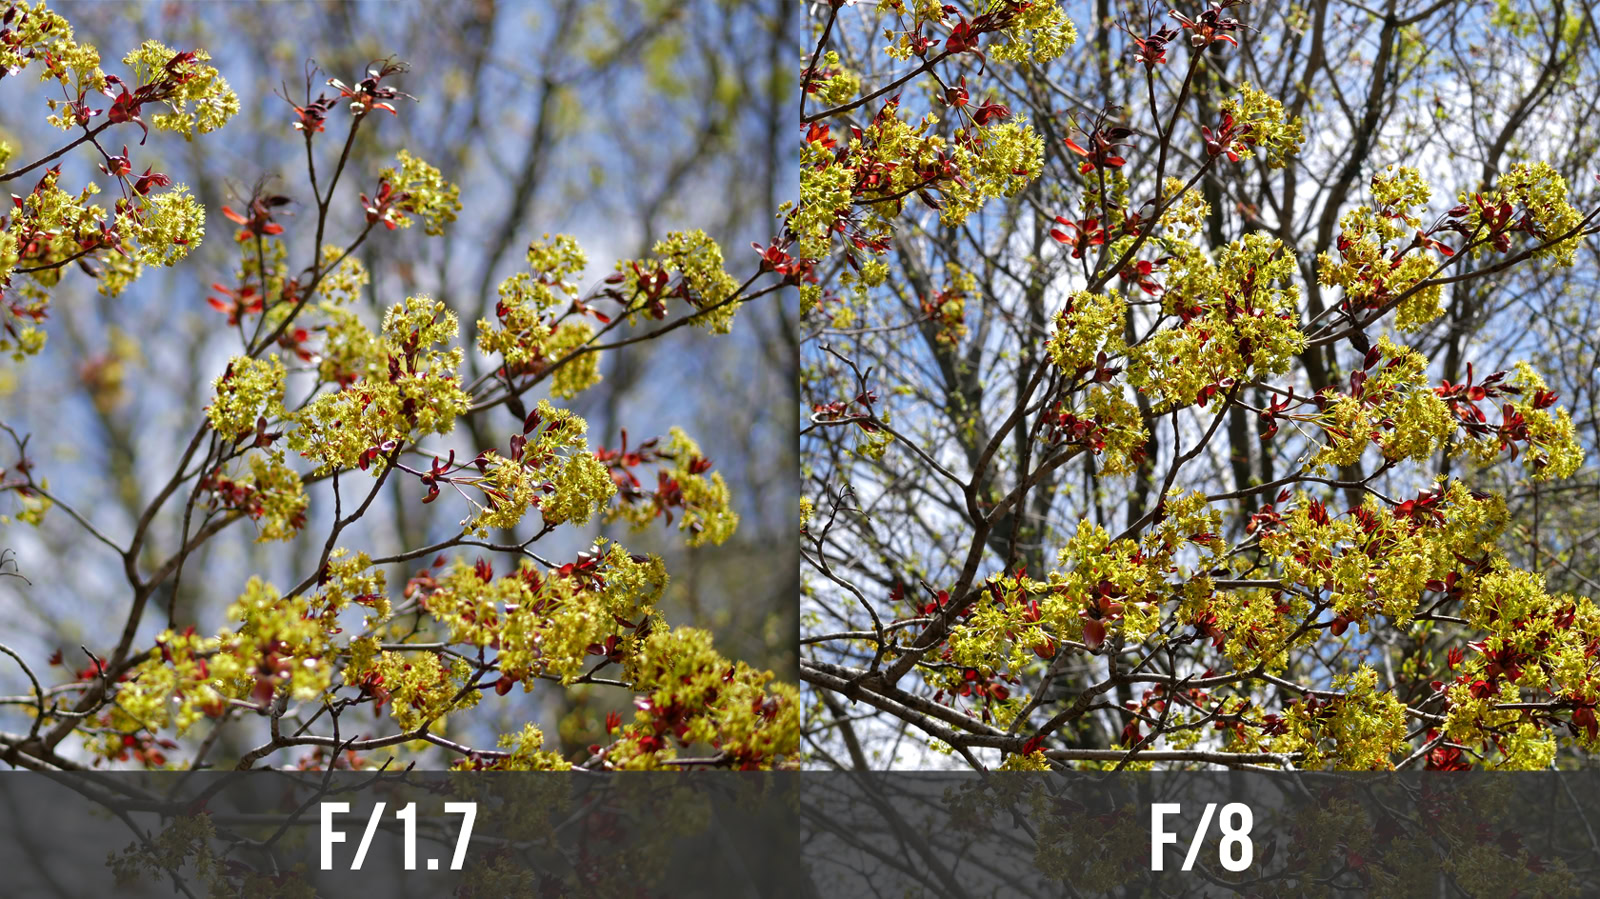 A side-by-side comparison of aperture values and their effect on depth of field.